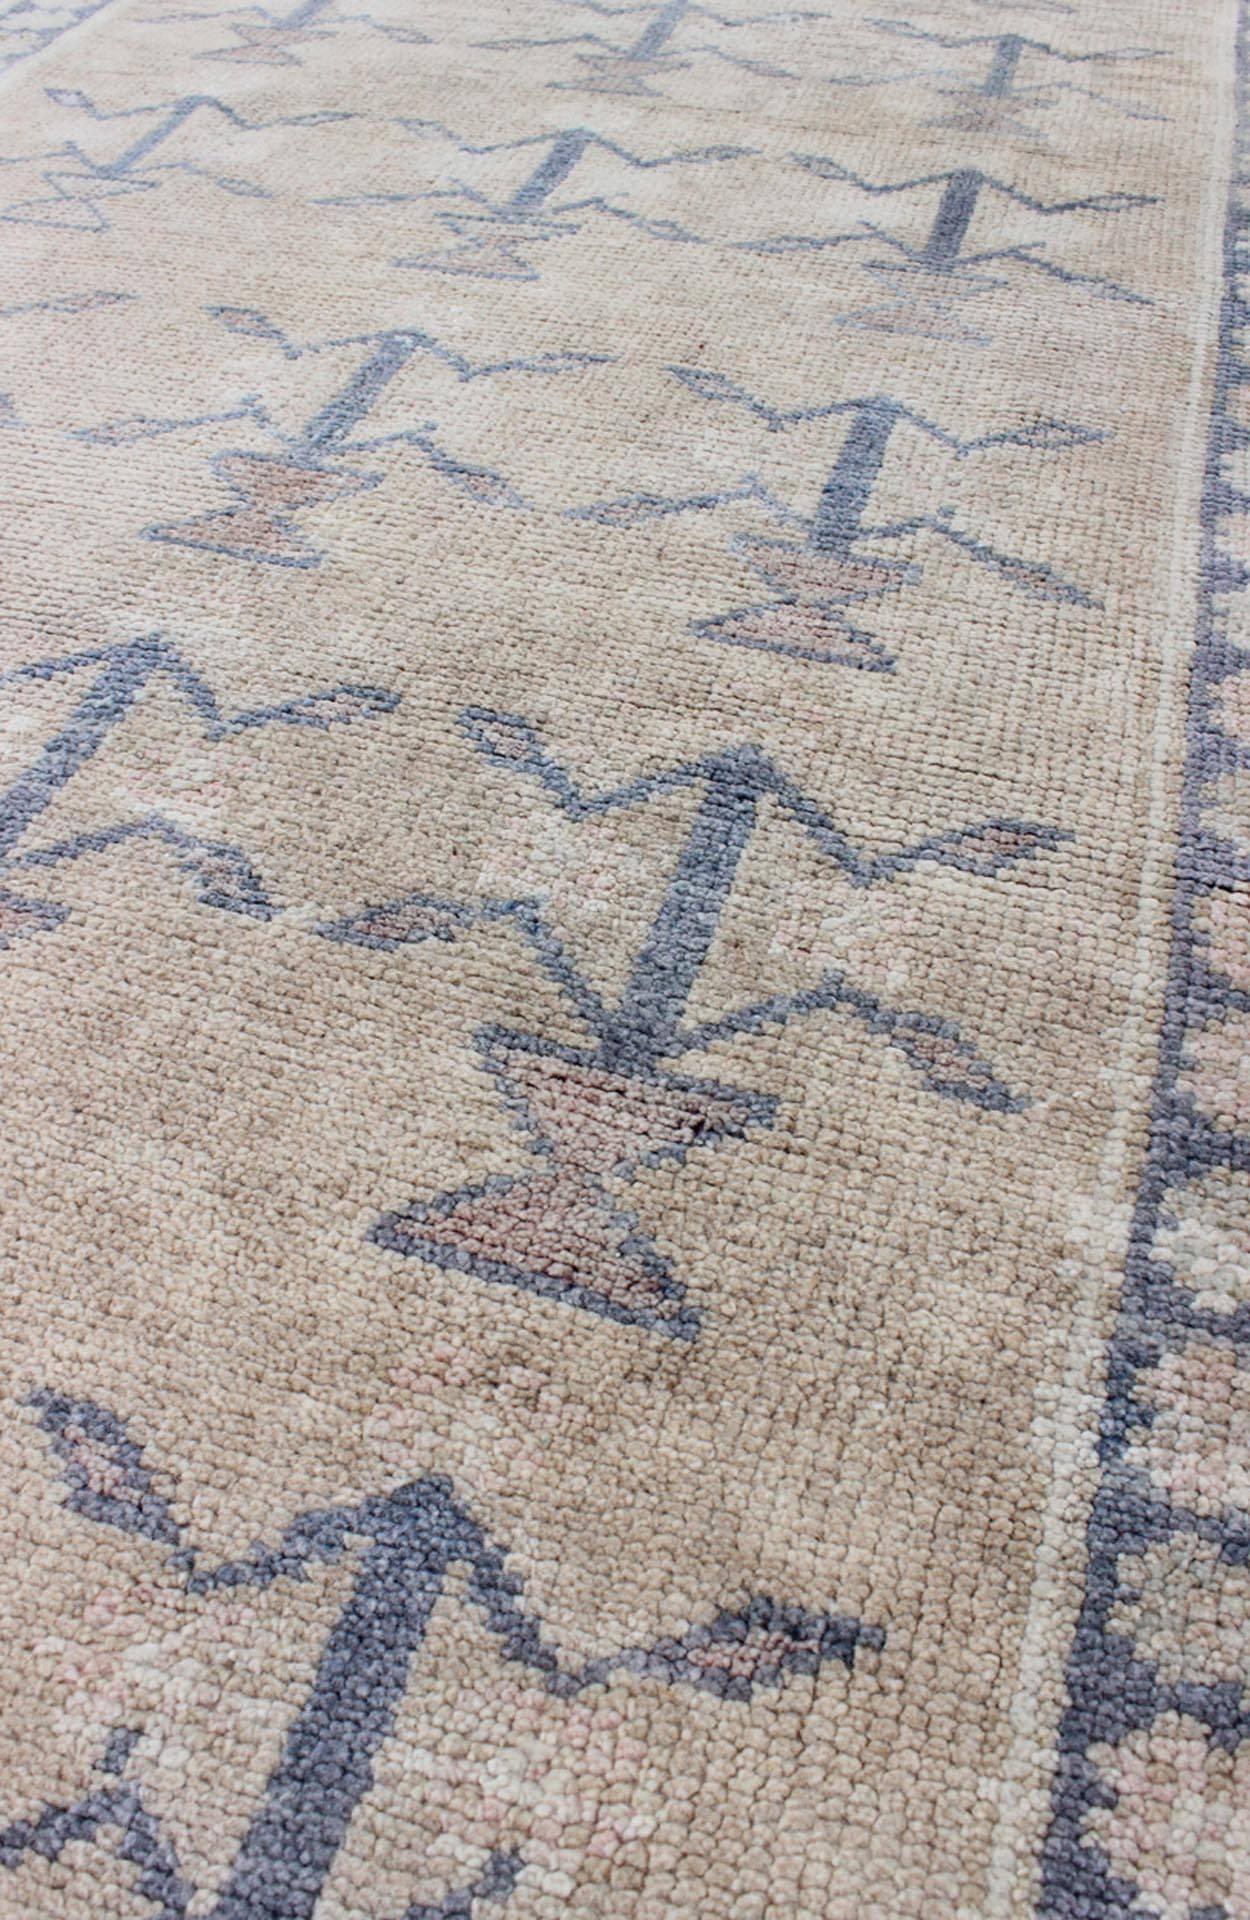 Wool Small Turkish Tulu Carpet with Blue Tribal Motifs in a Sand-Colored Field